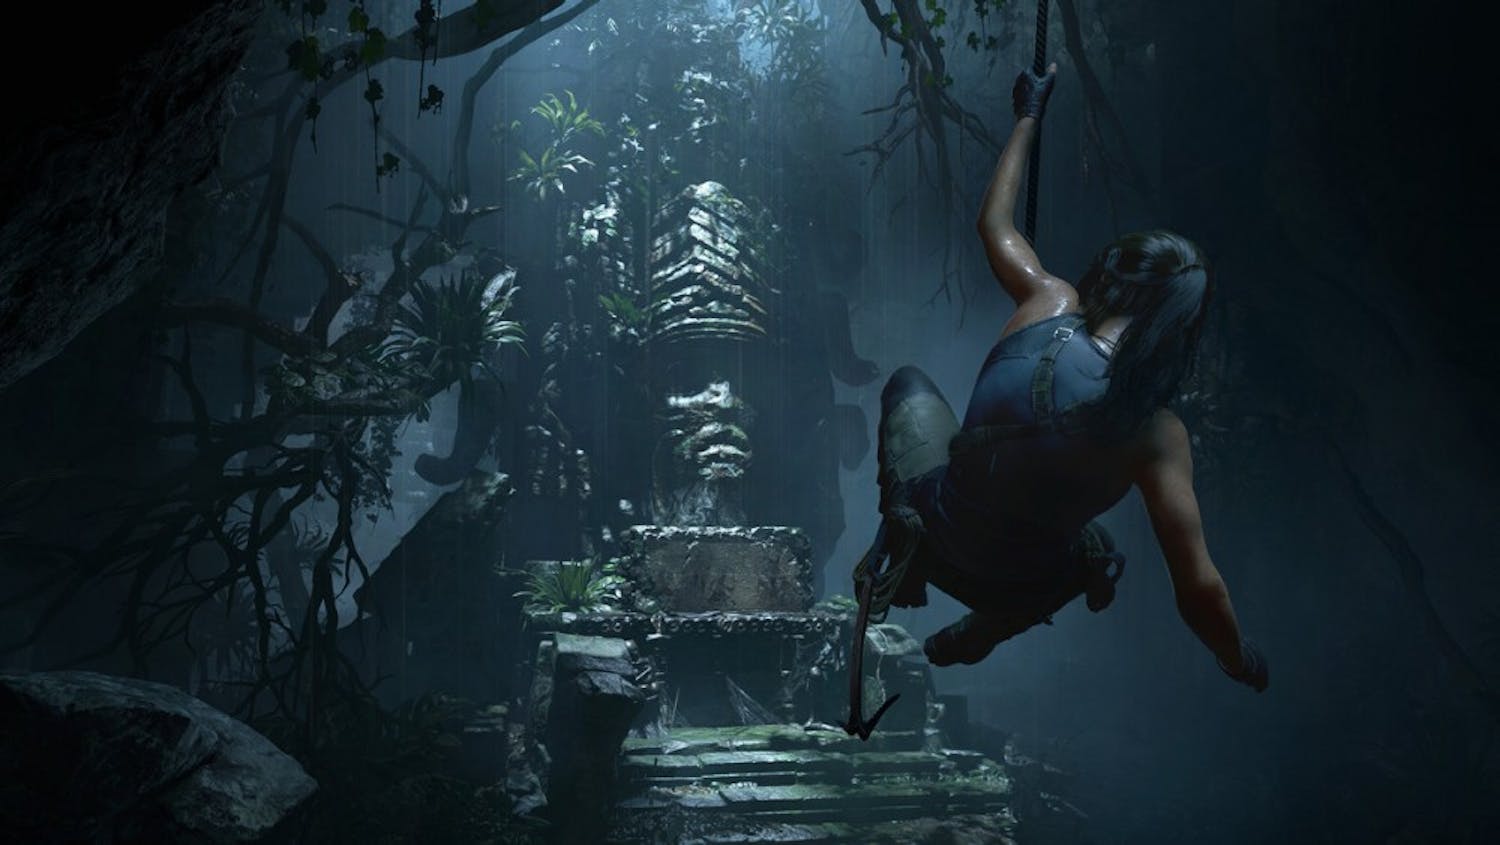 With a weak supporting cast and lack of innovation, "Shadow of the Tomb Raider" doesn't give Lara Croft's origin story a satisfying end.